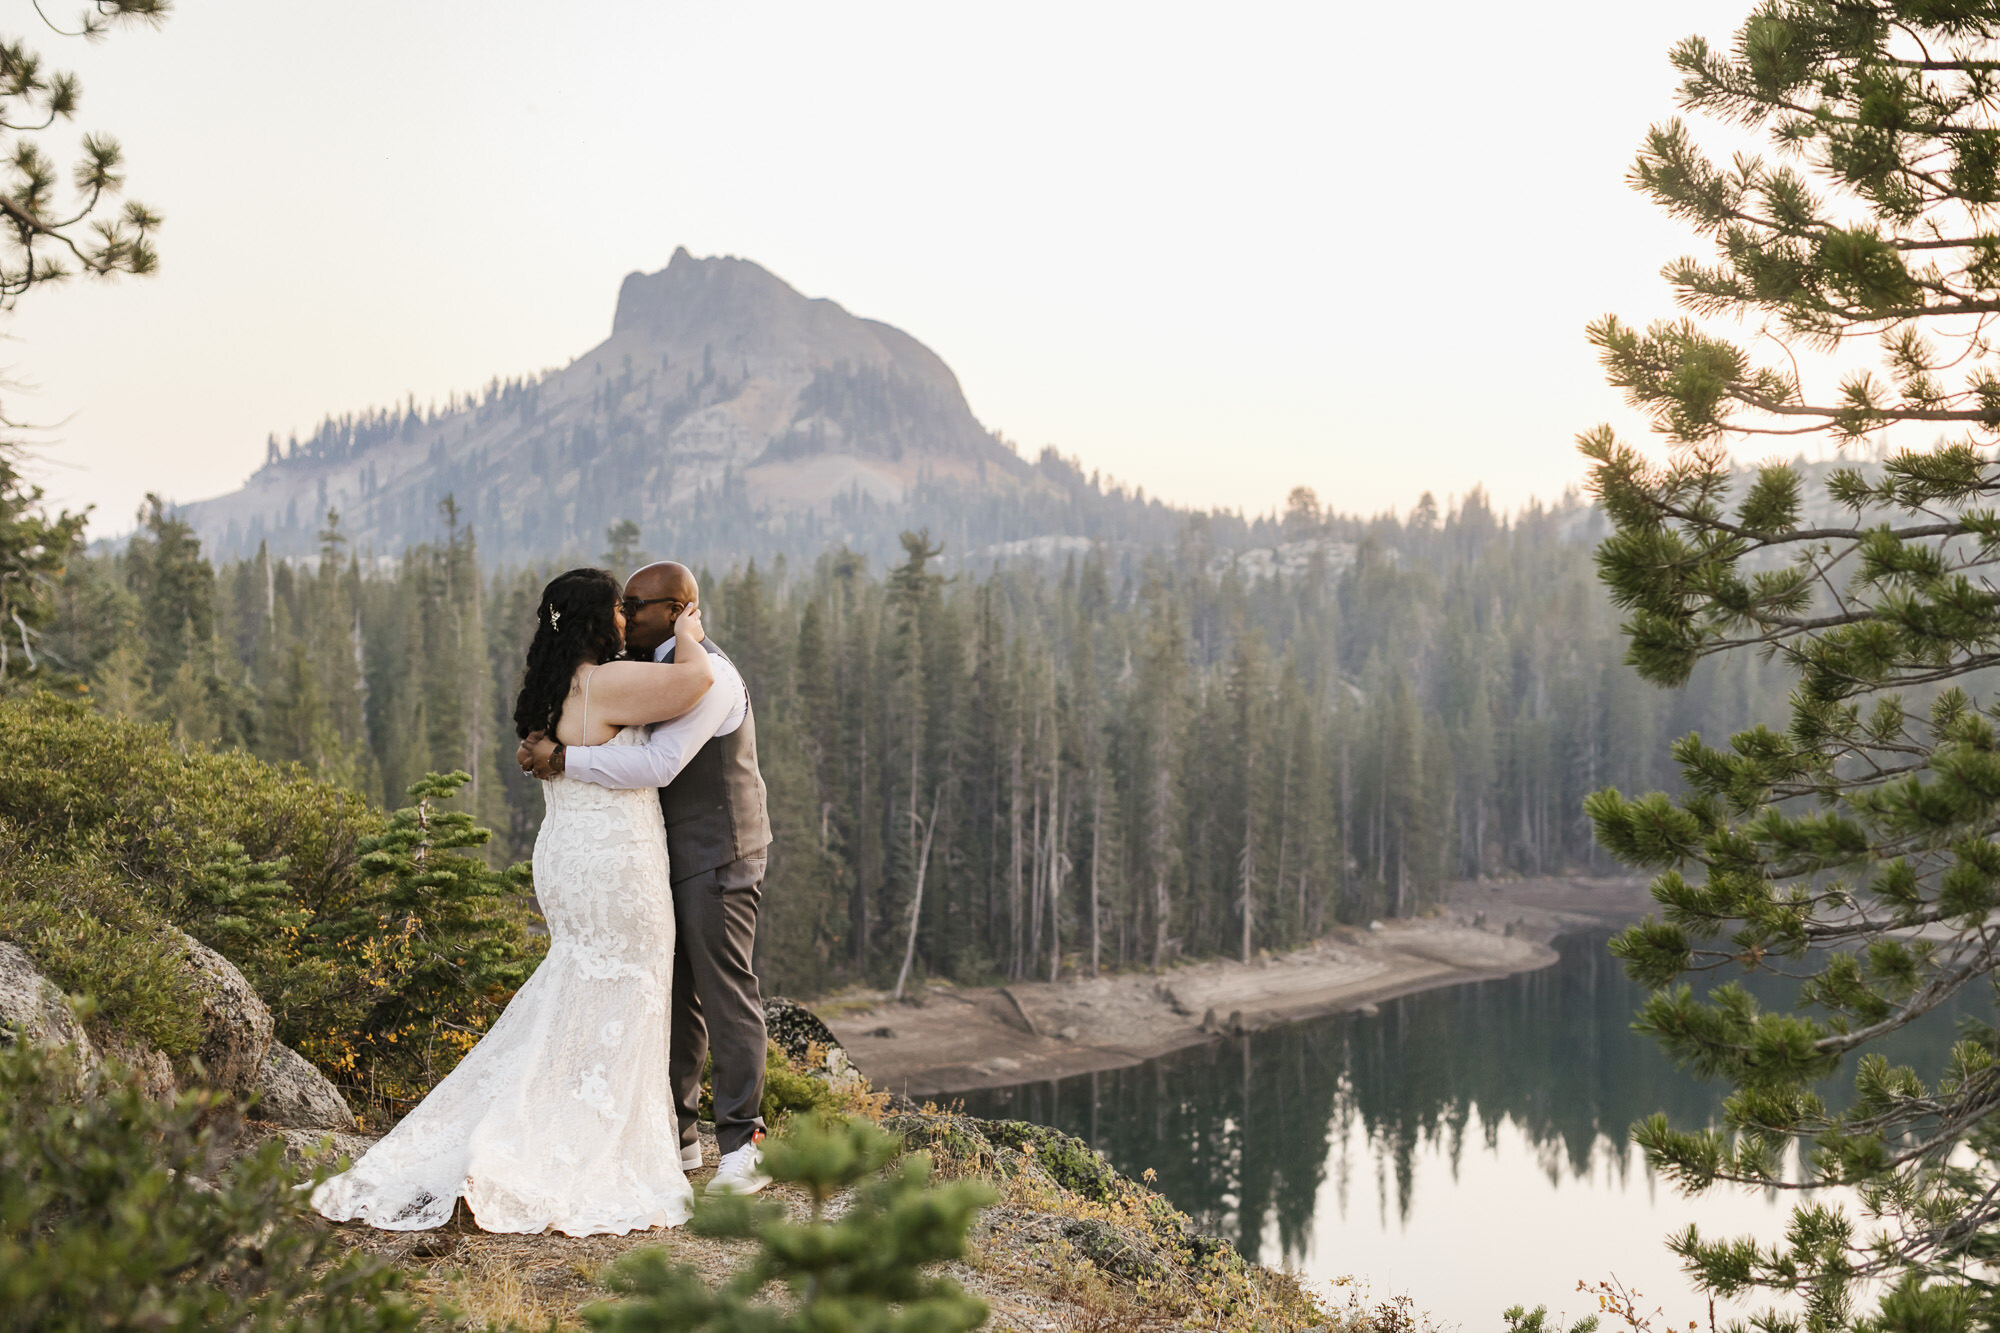 Wedding couple kiss in front of mountain peak in Tahoe forest